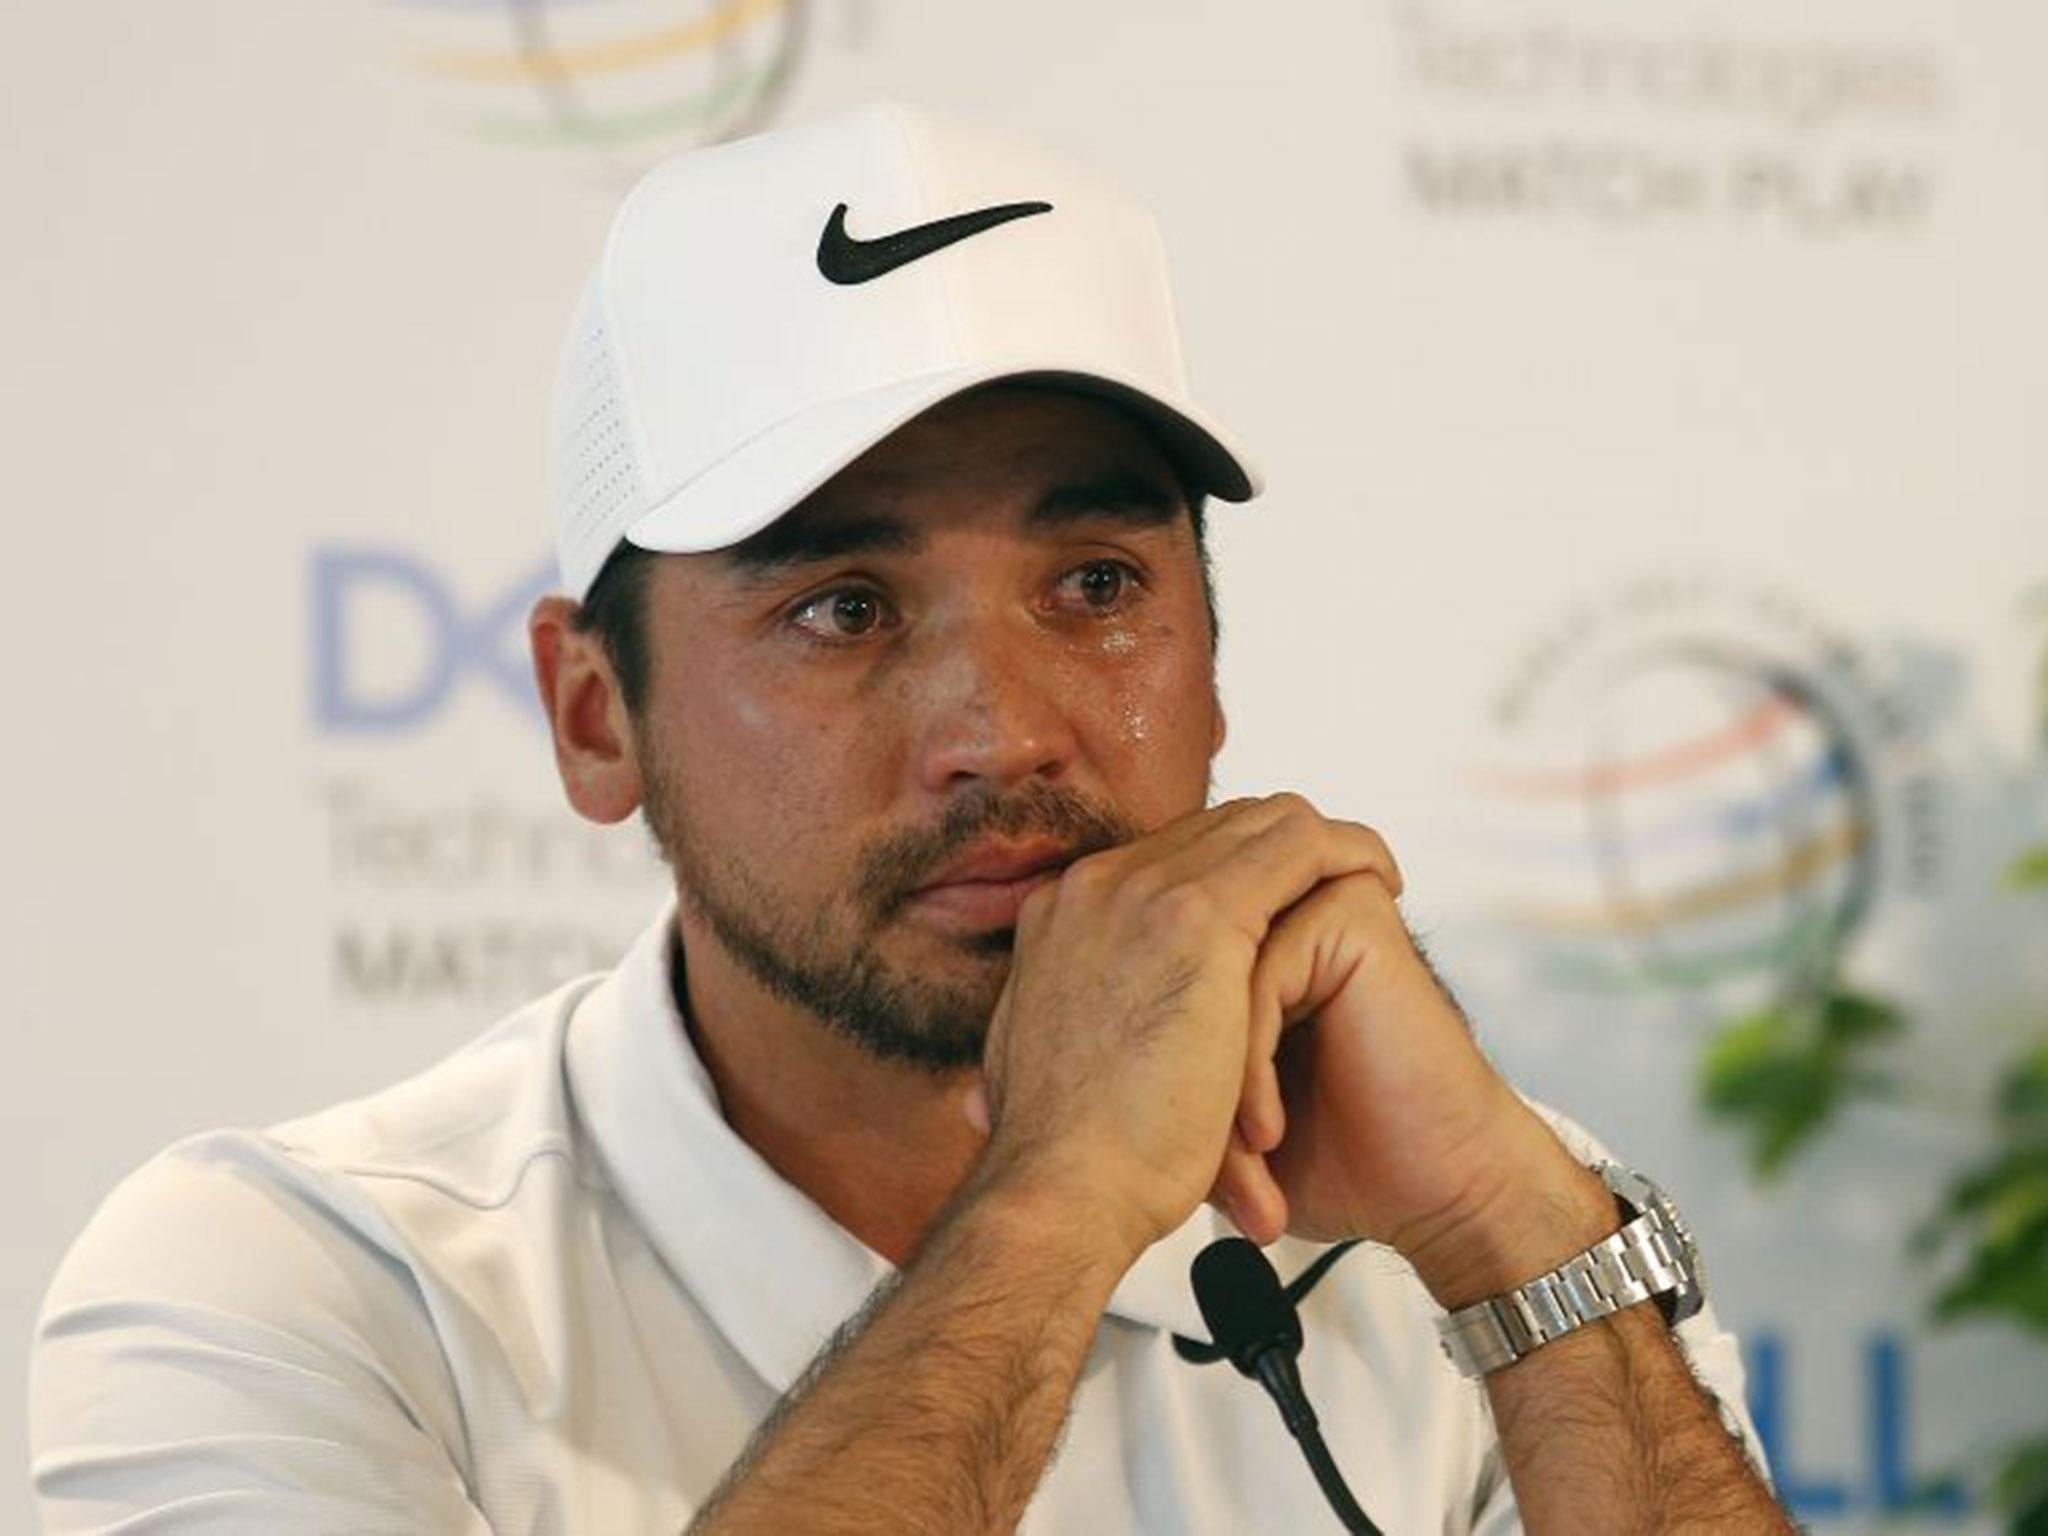 A visibly emotional Jason Day broke down in his post-round press conference